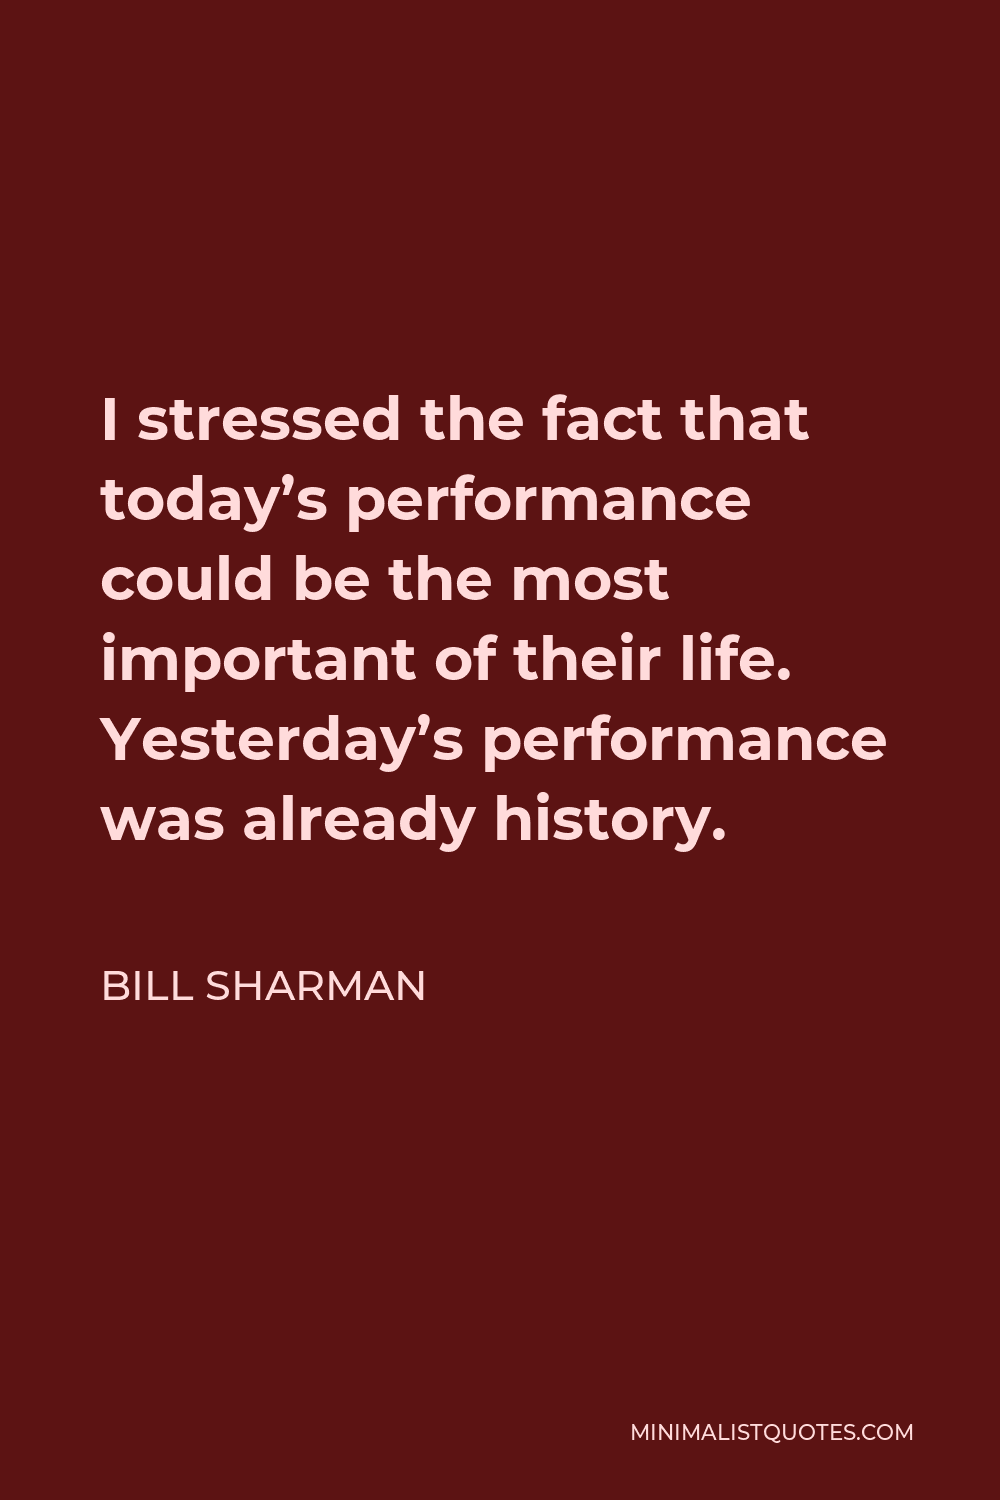 Bill Sharman Quote - I stressed the fact that today’s performance could be the most important of their life. Yesterday’s performance was already history.